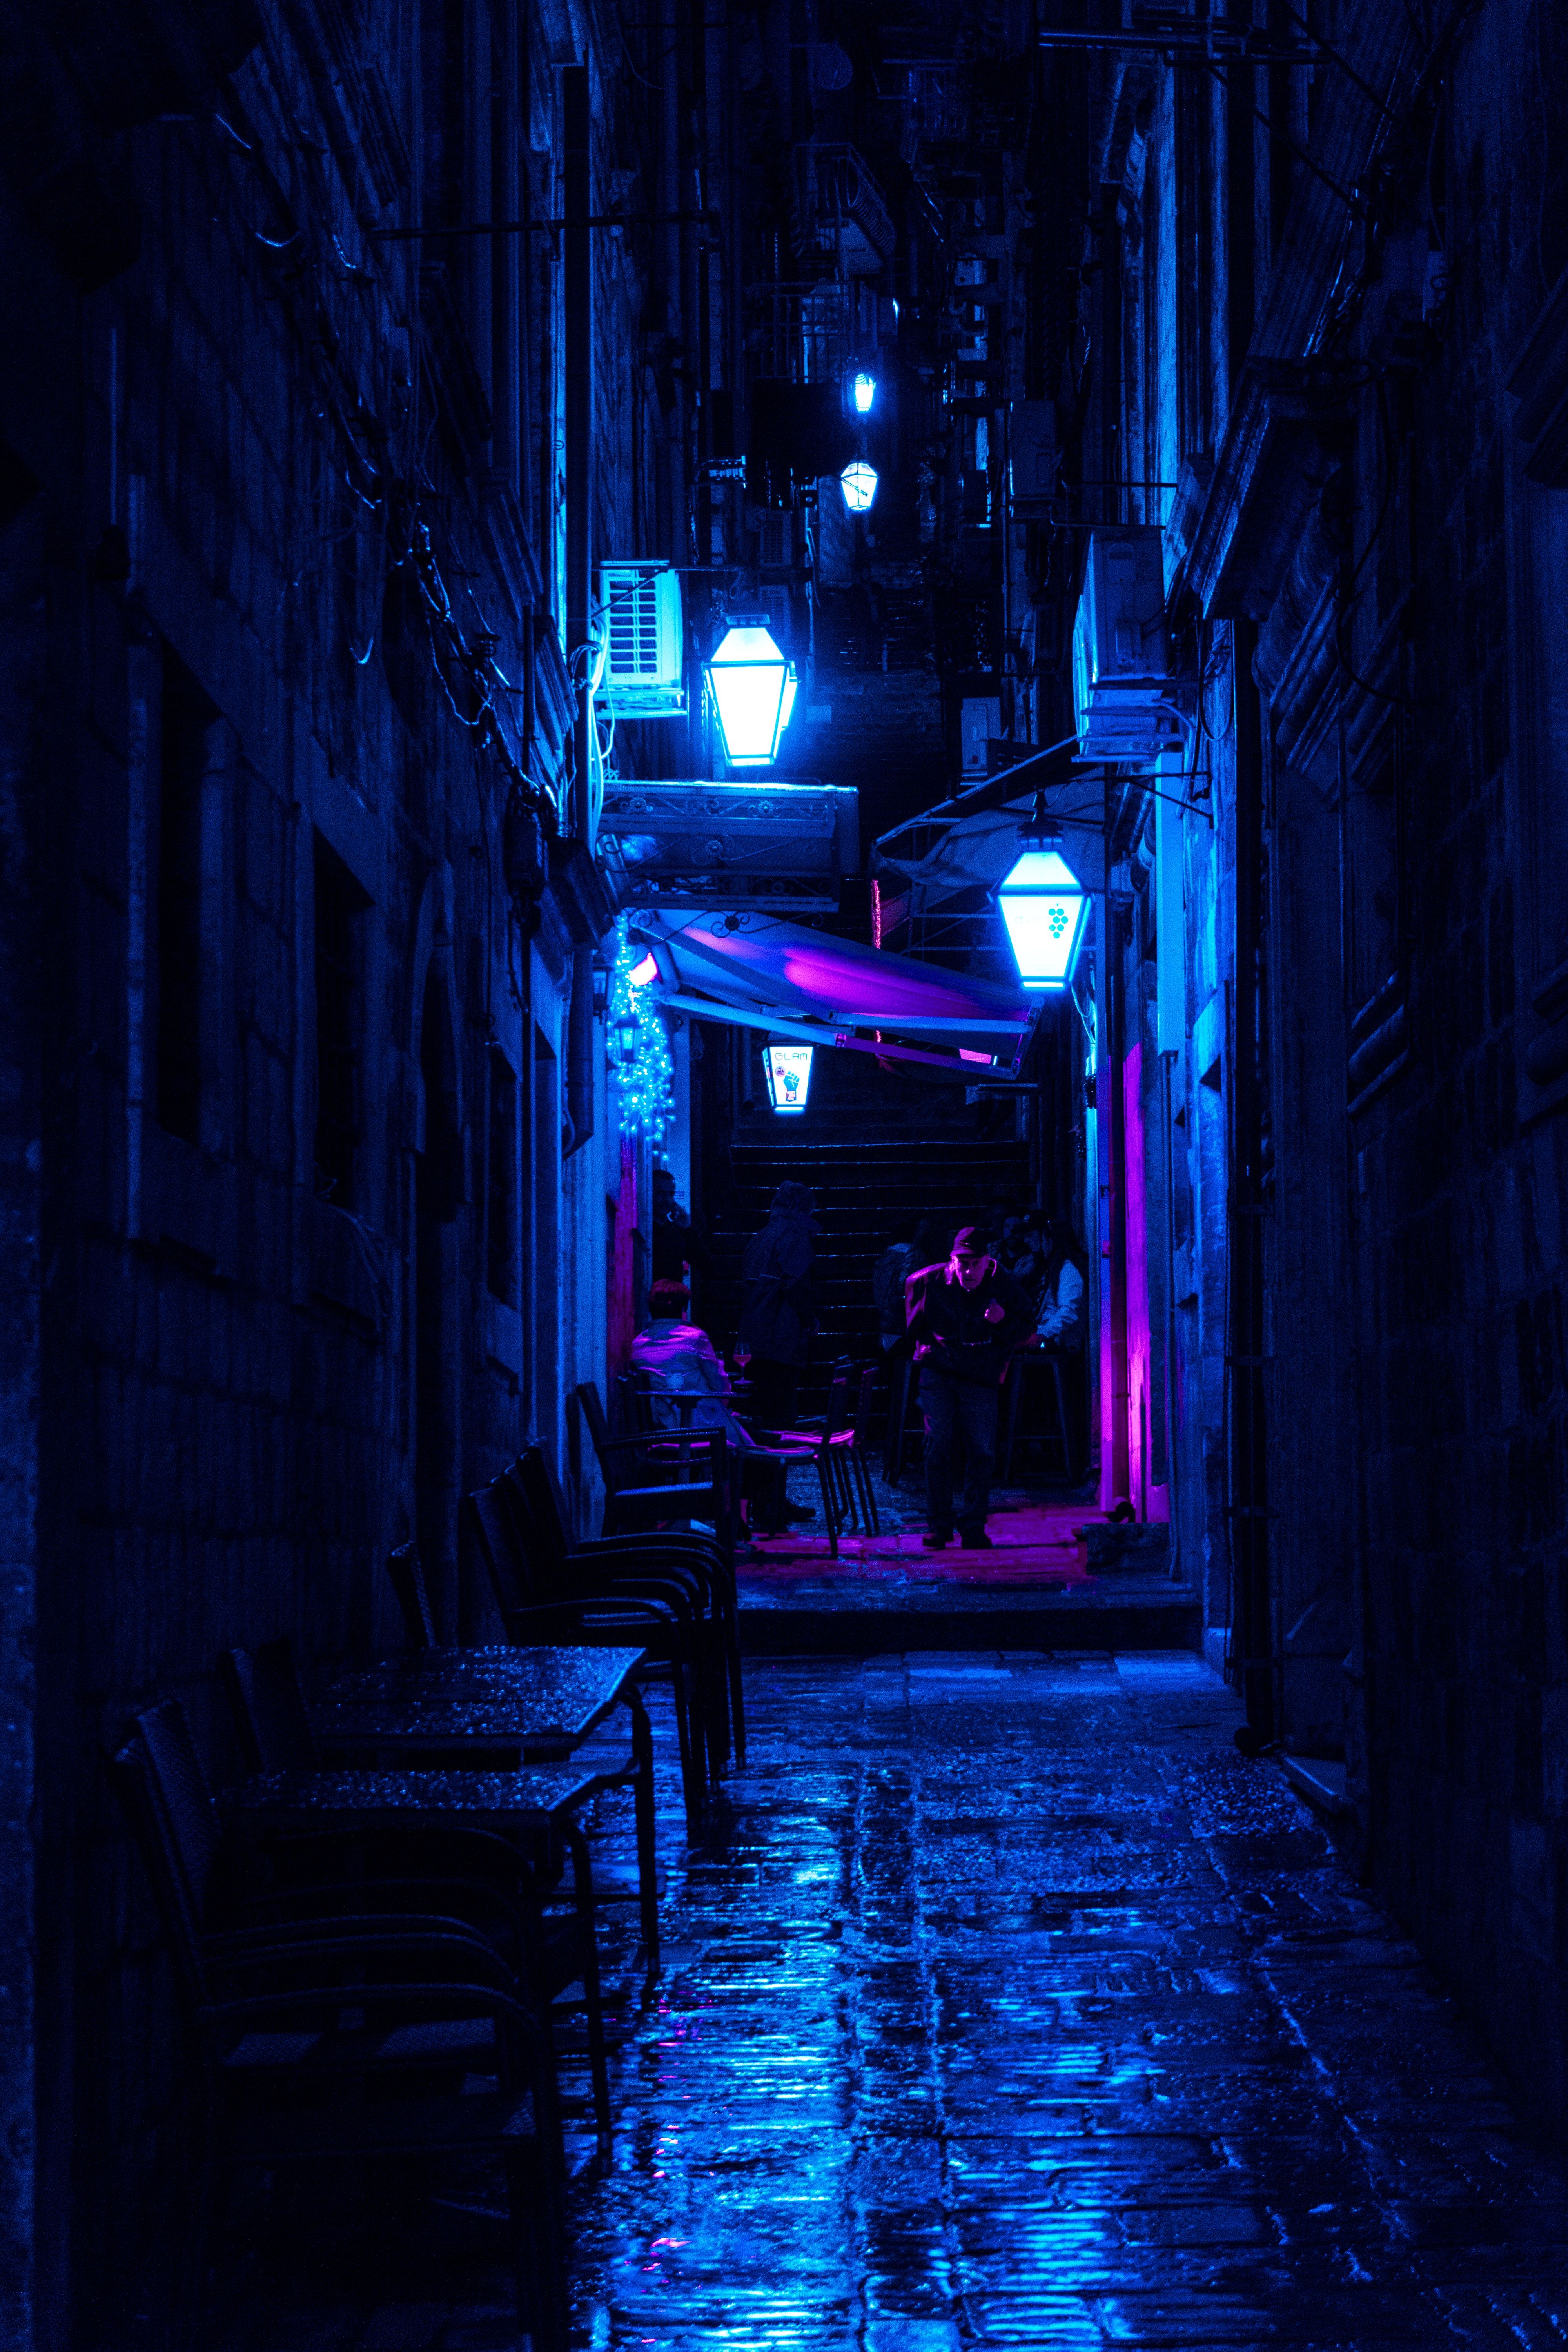 Dark Alley With Turned On Street Lamps · Free